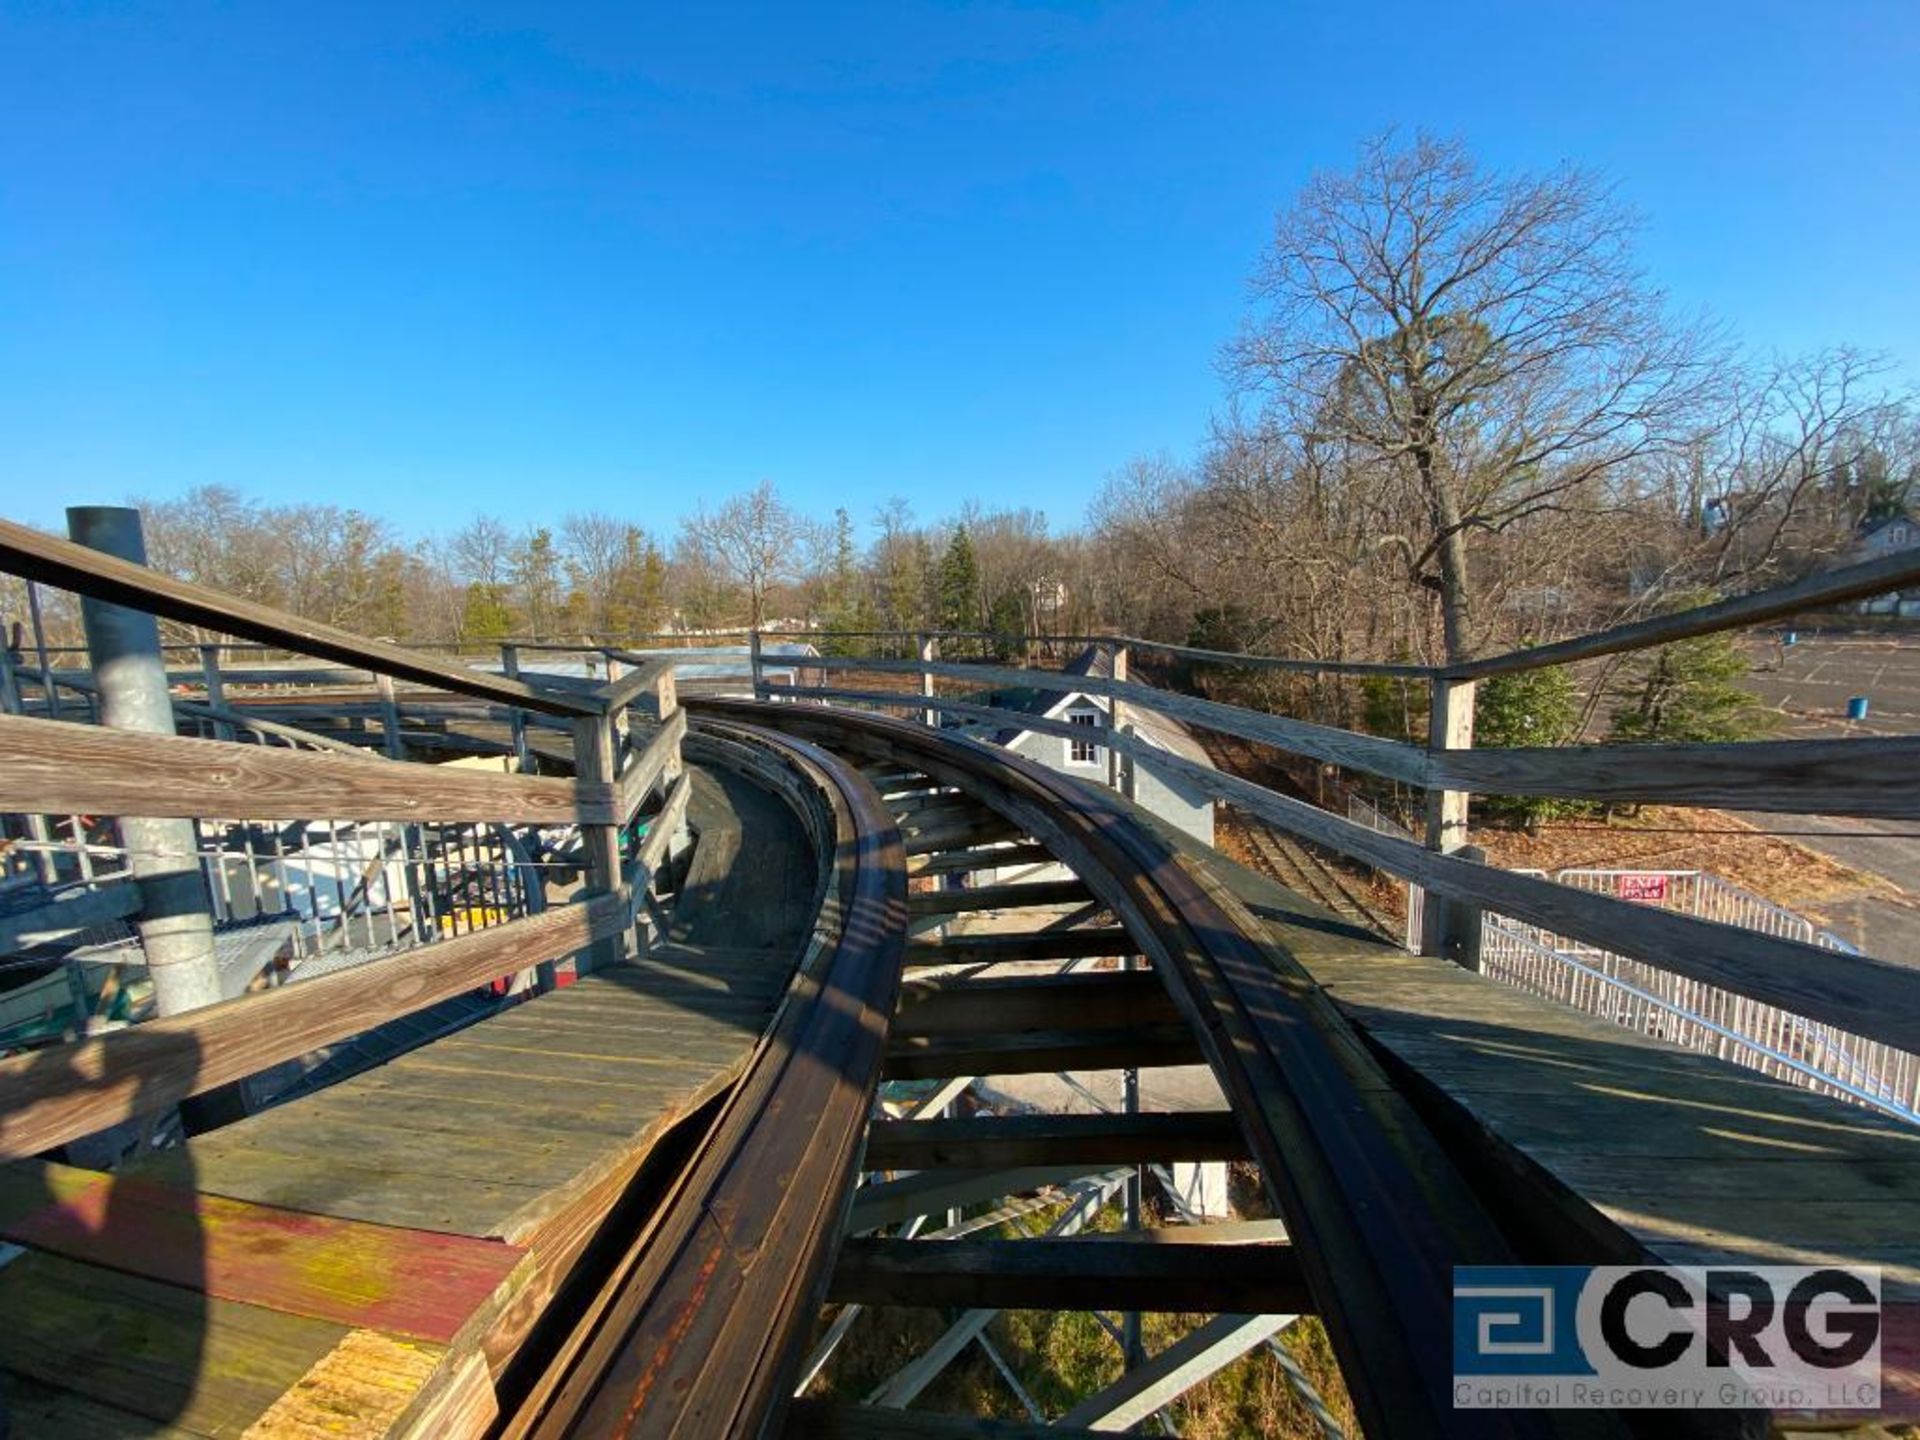 Hell Cat wood deck roller coaster, all galvanized steel structure frame, new in 2005, including - Image 6 of 9